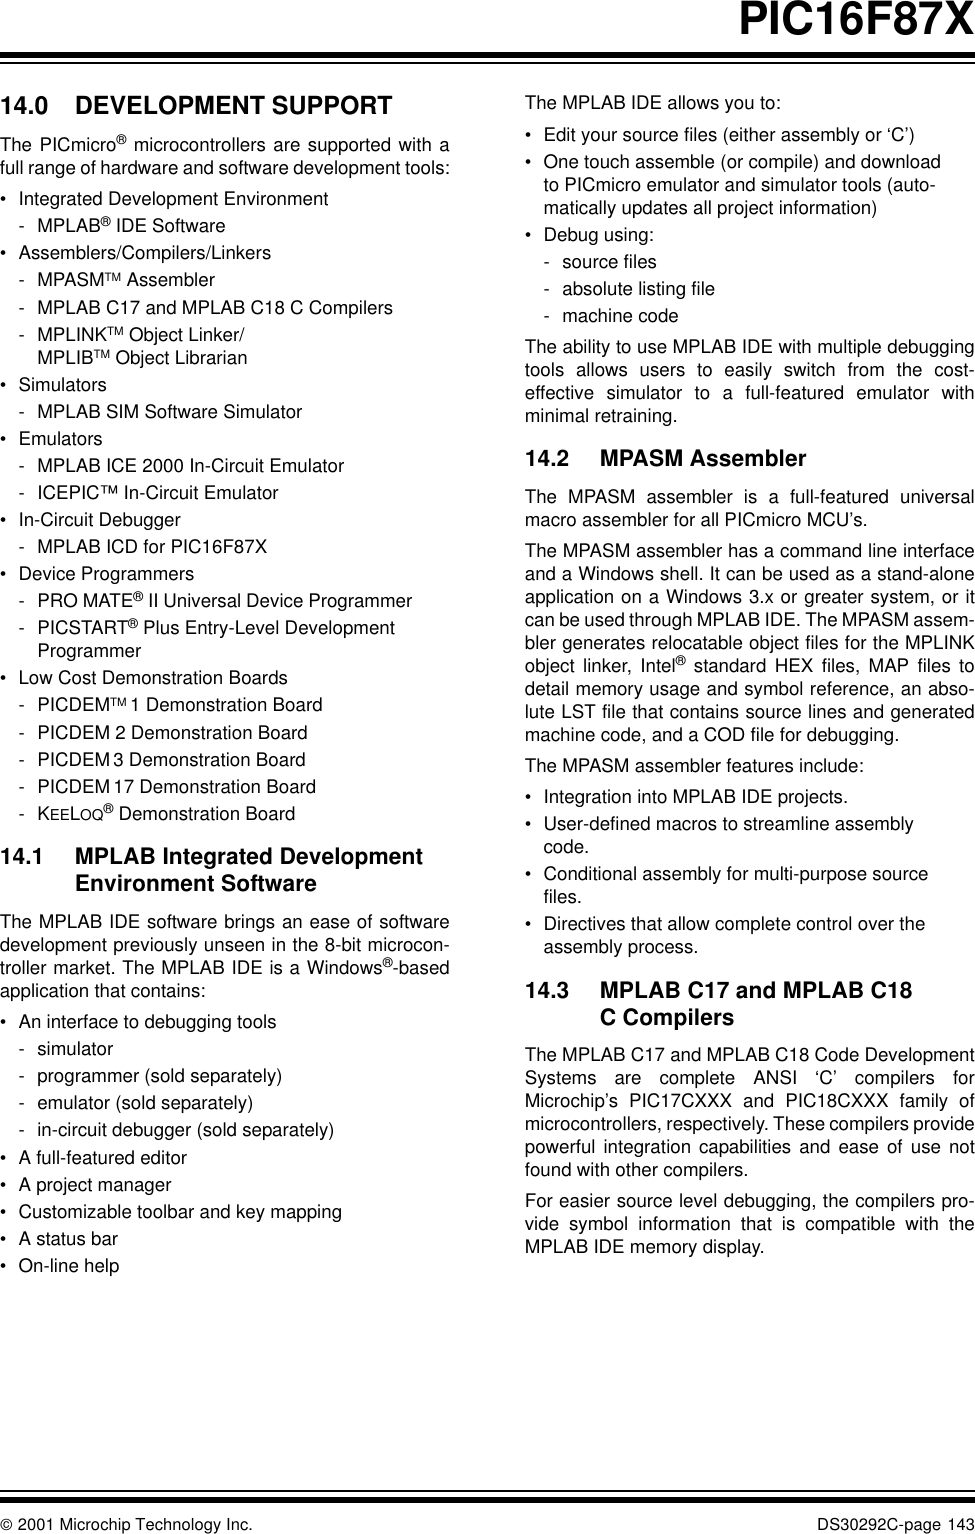  2001 Microchip Technology Inc. DS30292C-page 143PIC16F87X14.0 DEVELOPMENT SUPPORTThe PICmicro® microcontrollers are supported with afull range of hardware and software development tools:•Integrated Development Environment- MPLAB® IDE Software•Assemblers/Compilers/Linkers- MPASMTM Assembler- MPLAB C17 and MPLAB C18 C Compilers-MPLINKTM Object Linker/MPLIBTM Object Librarian•Simulators- MPLAB SIM Software Simulator•Emulators- MPLAB ICE 2000 In-Circuit Emulator- ICEPIC™ In-Circuit Emulator•In-Circuit Debugger- MPLAB ICD for PIC16F87X•Device Programmers-PRO MATE® II Universal Device Programmer- PICSTART® Plus Entry-Level DevelopmentProgrammer•Low Cost Demonstration Boards- PICDEMTM 1 Demonstration Board- PICDEM 2 Demonstration Board- PICDEM 3 Demonstration Board- PICDEM 17 Demonstration Board-KEELOQ® Demonstration Board14.1 MPLAB Integrated Development Environment SoftwareThe MPLAB IDE software brings an ease of softwaredevelopment previously unseen in the 8-bit microcon-troller market. The MPLAB IDE is a Windows®-basedapplication that contains:•An interface to debugging tools- simulator- programmer (sold separately)- emulator (sold separately)- in-circuit debugger (sold separately)•A full-featured editor•A project manager•Customizable toolbar and key mapping•A status bar•On-line helpThe MPLAB IDE allows you to:•Edit your source files (either assembly or ‘C’)•One touch assemble (or compile) and download to PICmicro emulator and simulator tools (auto-matically updates all project information)•Debug using:- source files- absolute listing file- machine codeThe ability to use MPLAB IDE with multiple debuggingtools allows users to easily switch from the cost-effective simulator to a full-featured emulator withminimal retraining.14.2 MPASM AssemblerThe MPASM assembler is a full-featured universalmacro assembler for all PICmicro MCU’s.The MPASM assembler has a command line interfaceand a Windows shell. It can be used as a stand-aloneapplication on a Windows 3.x or greater system, or itcan be used through MPLAB IDE. The MPASM assem-bler generates relocatable object files for the MPLINKobject linker, Intel® standard HEX files, MAP files todetail memory usage and symbol reference, an abso-lute LST file that contains source lines and generatedmachine code, and a COD file for debugging.The MPASM assembler features include:•Integration into MPLAB IDE projects.•User-defined macros to streamline assembly code.•Conditional assembly for multi-purpose source files.•Directives that allow complete control over the assembly process.14.3 MPLAB C17 and MPLAB C18 C CompilersThe MPLAB C17 and MPLAB C18 Code DevelopmentSystems are complete ANSI ‘C’ compilers forMicrochip’s PIC17CXXX and PIC18CXXX family ofmicrocontrollers, respectively. These compilers providepowerful integration capabilities and ease of use notfound with other compilers.For easier source level debugging, the compilers pro-vide symbol information that is compatible with theMPLAB IDE memory display.